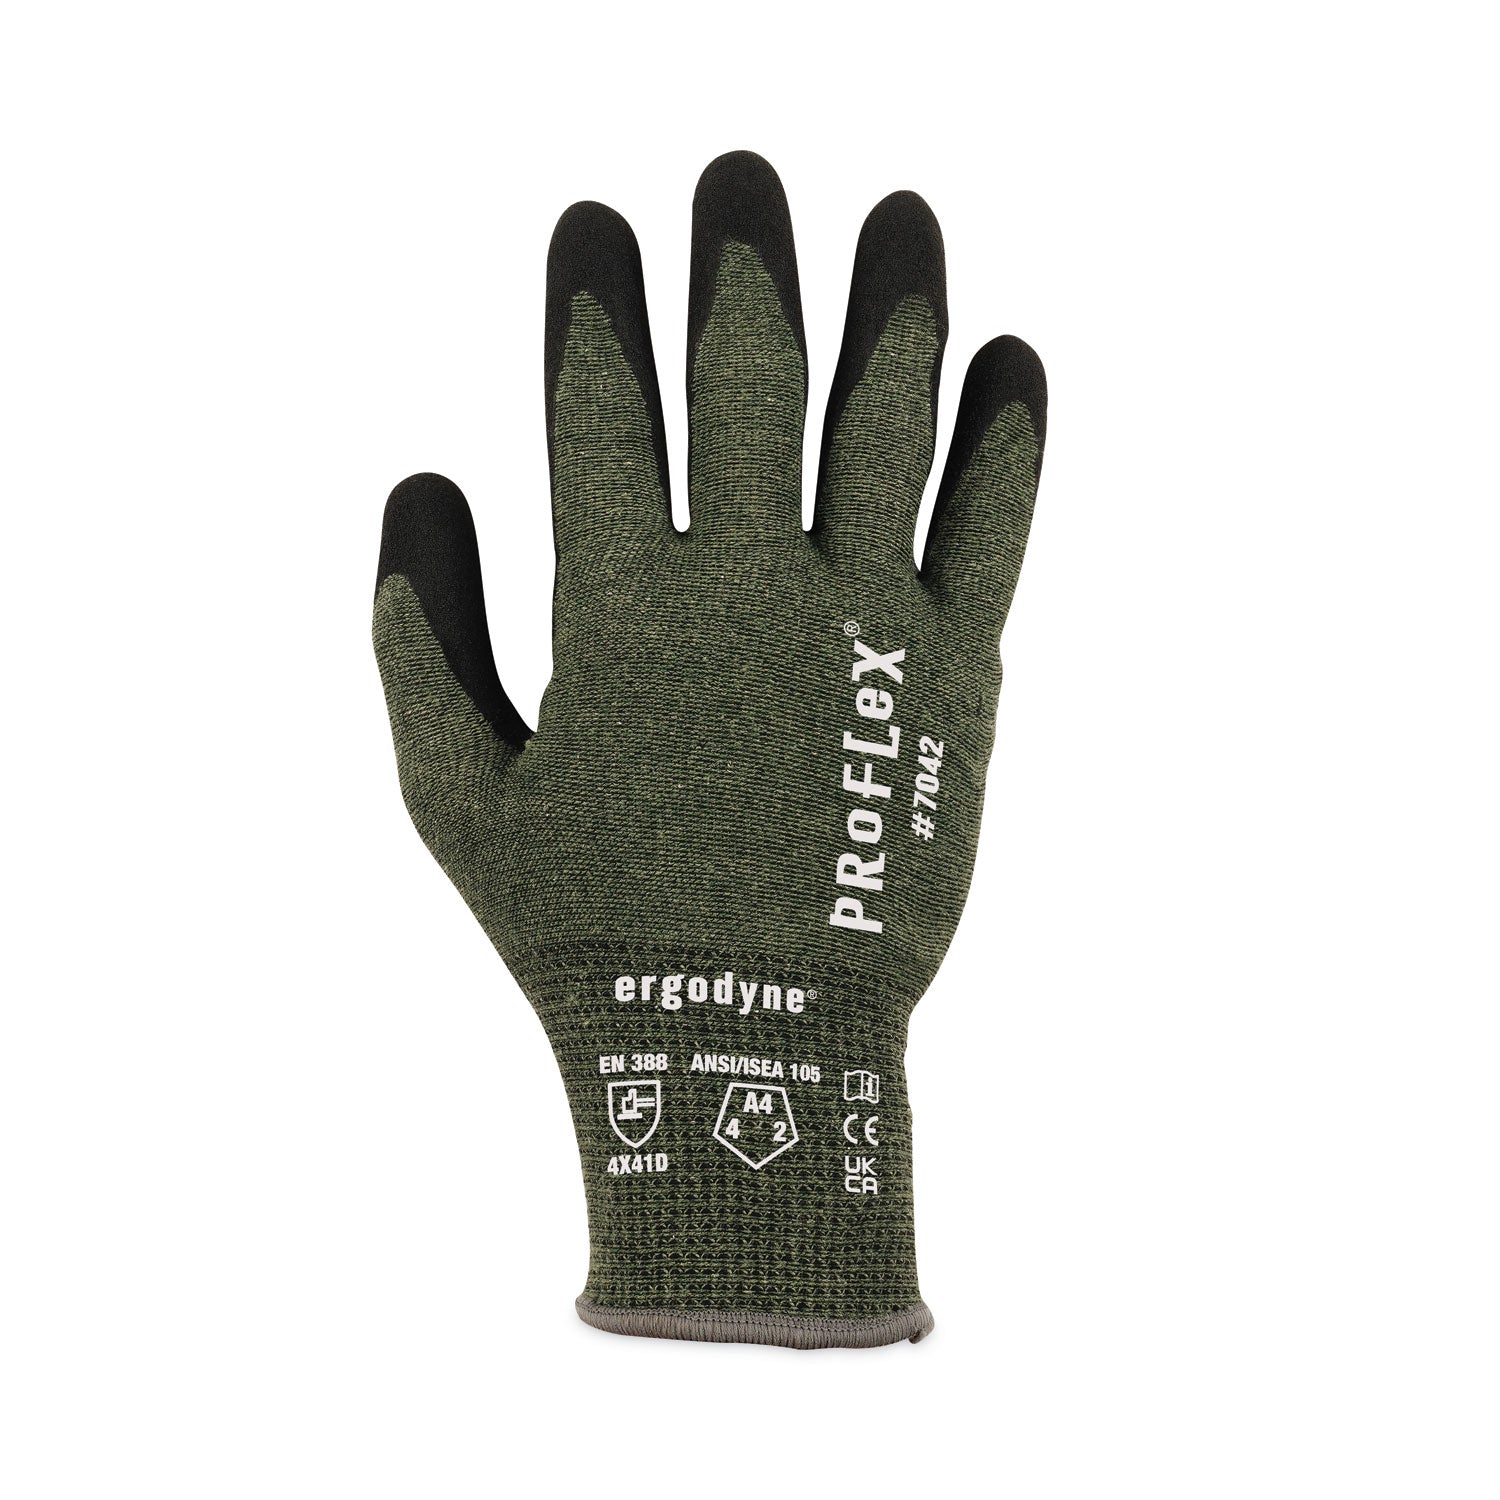 proflex-7042-ansi-a4-nitrile-coated-cr-gloves-green-large-pair-ships-in-1-3-business-days_ego10344 - 8